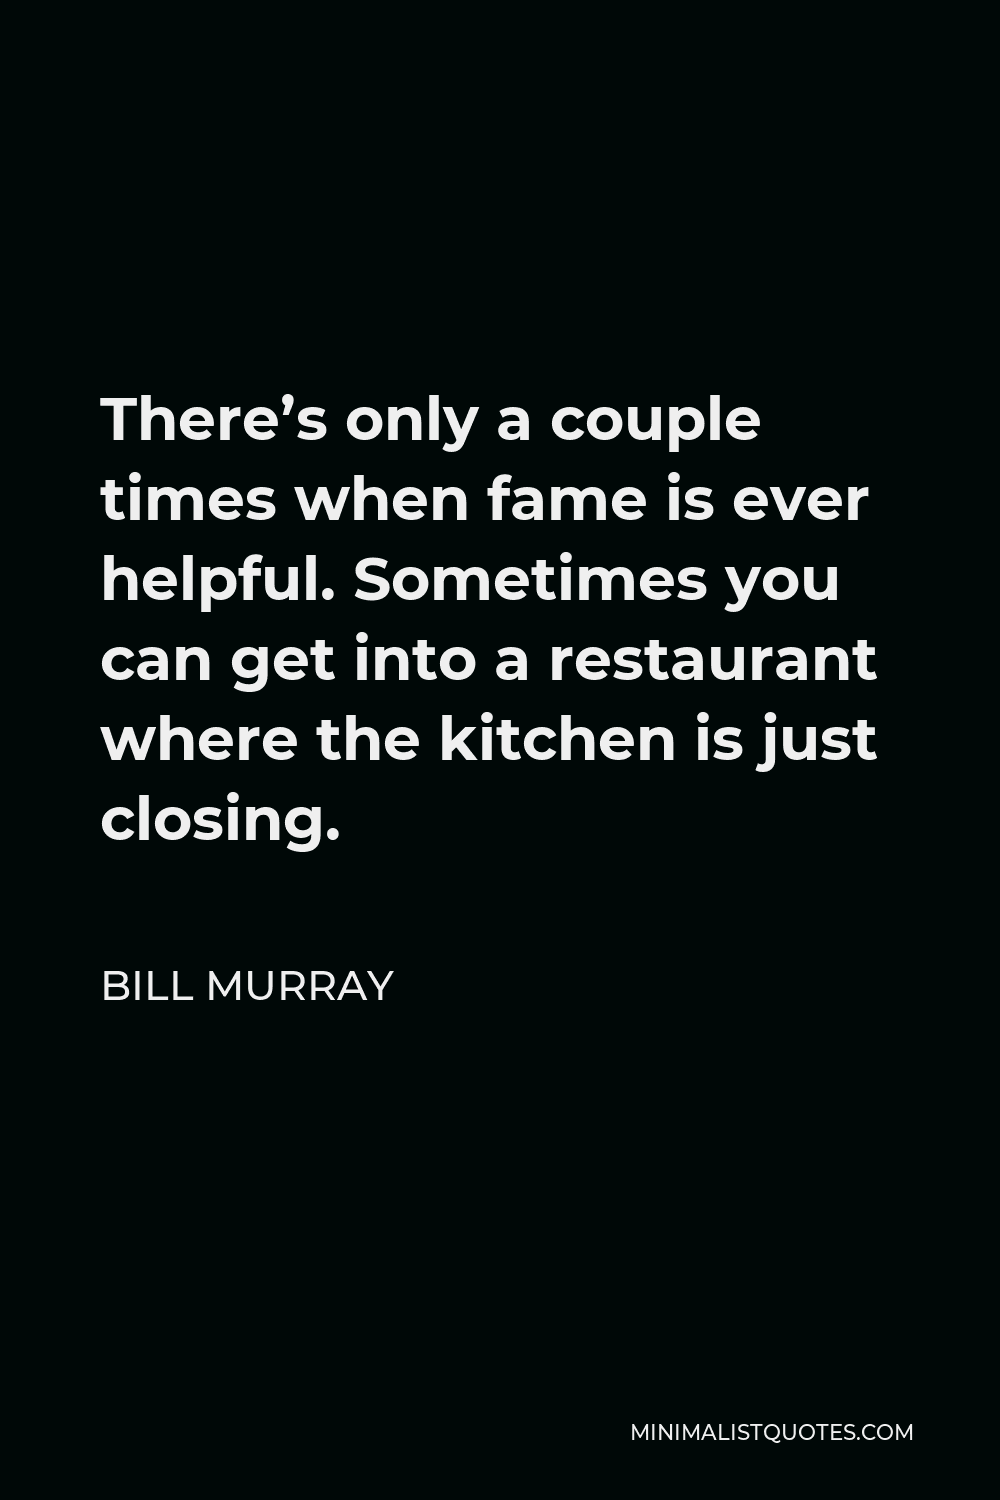 Bill Murray Quote - There’s only a couple times when fame is ever helpful. Sometimes you can get into a restaurant where the kitchen is just closing.